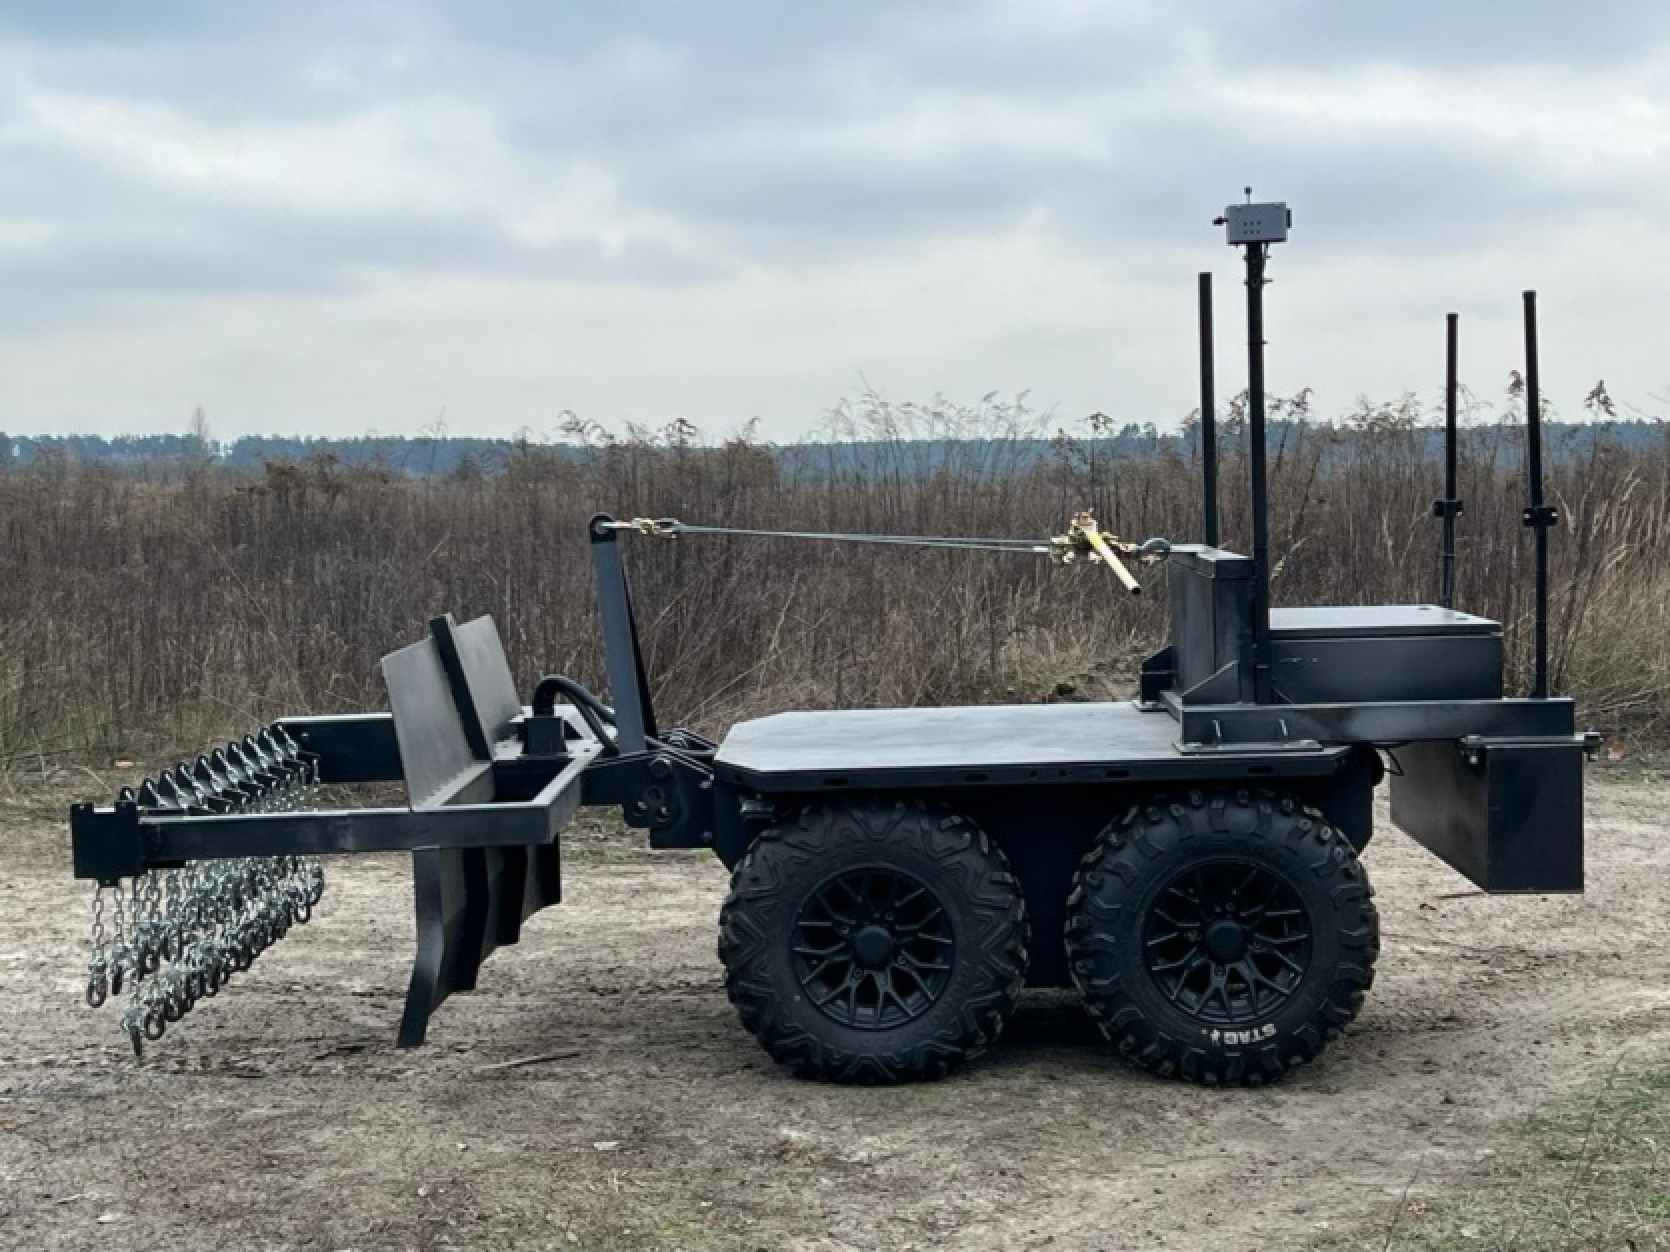 Ukrainian developers have created Ratel Deminer - a machine for remote demining